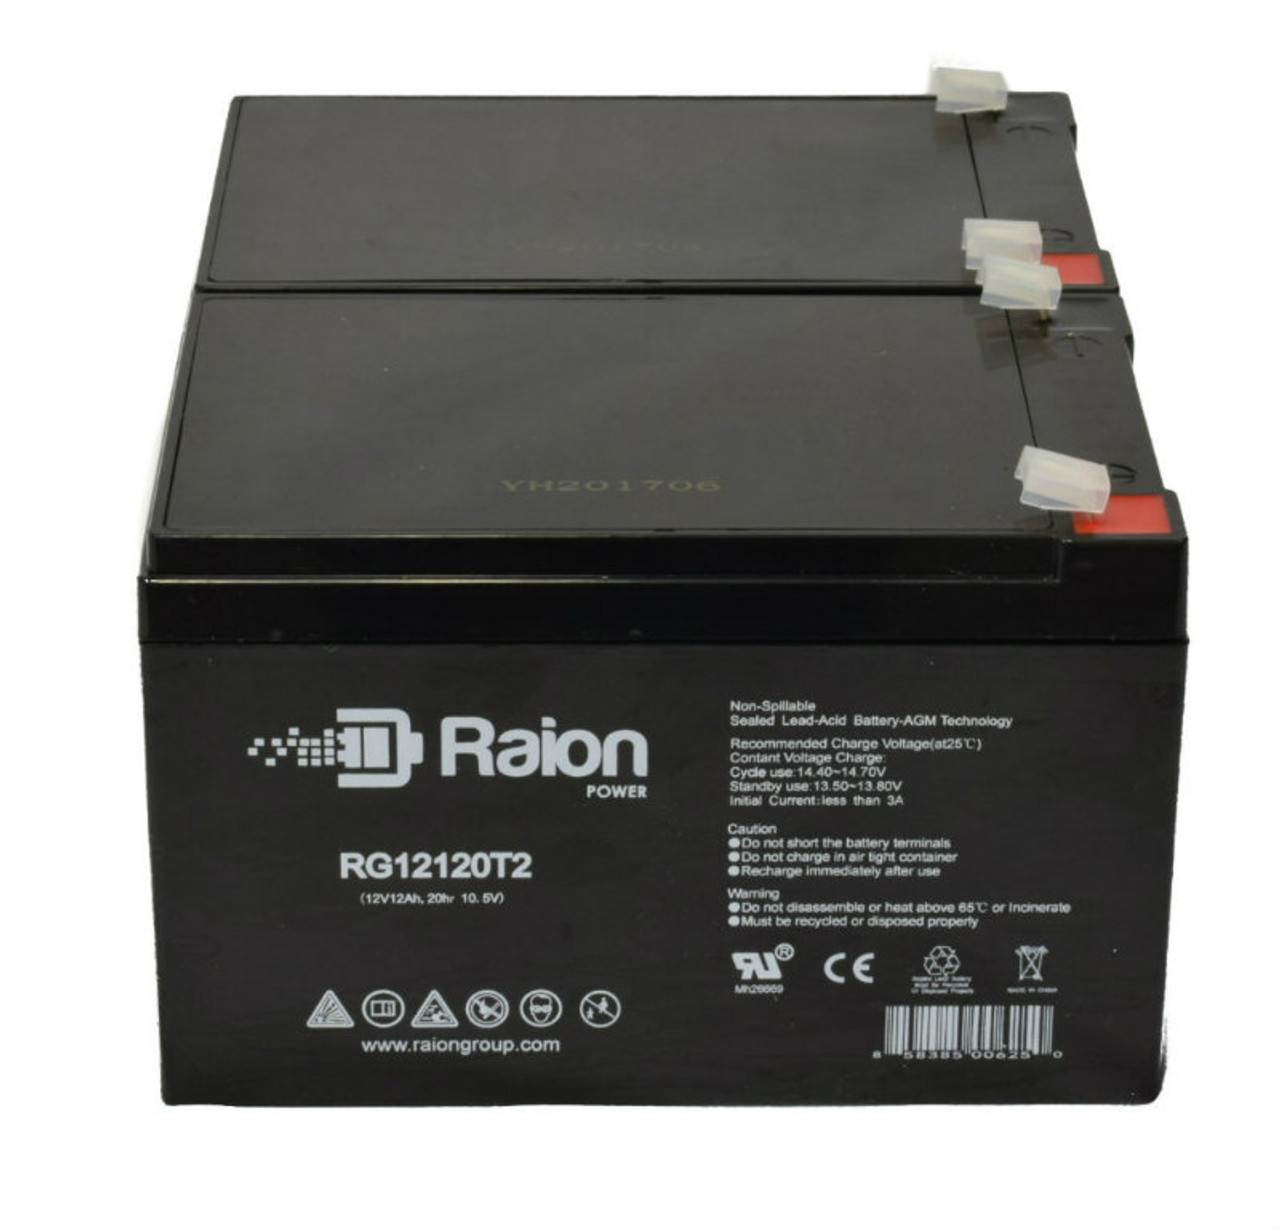 Raion Power 12V 12Ah Replacement Alarm Security System Battery for Altronix AL400ULADA - 2 Pack